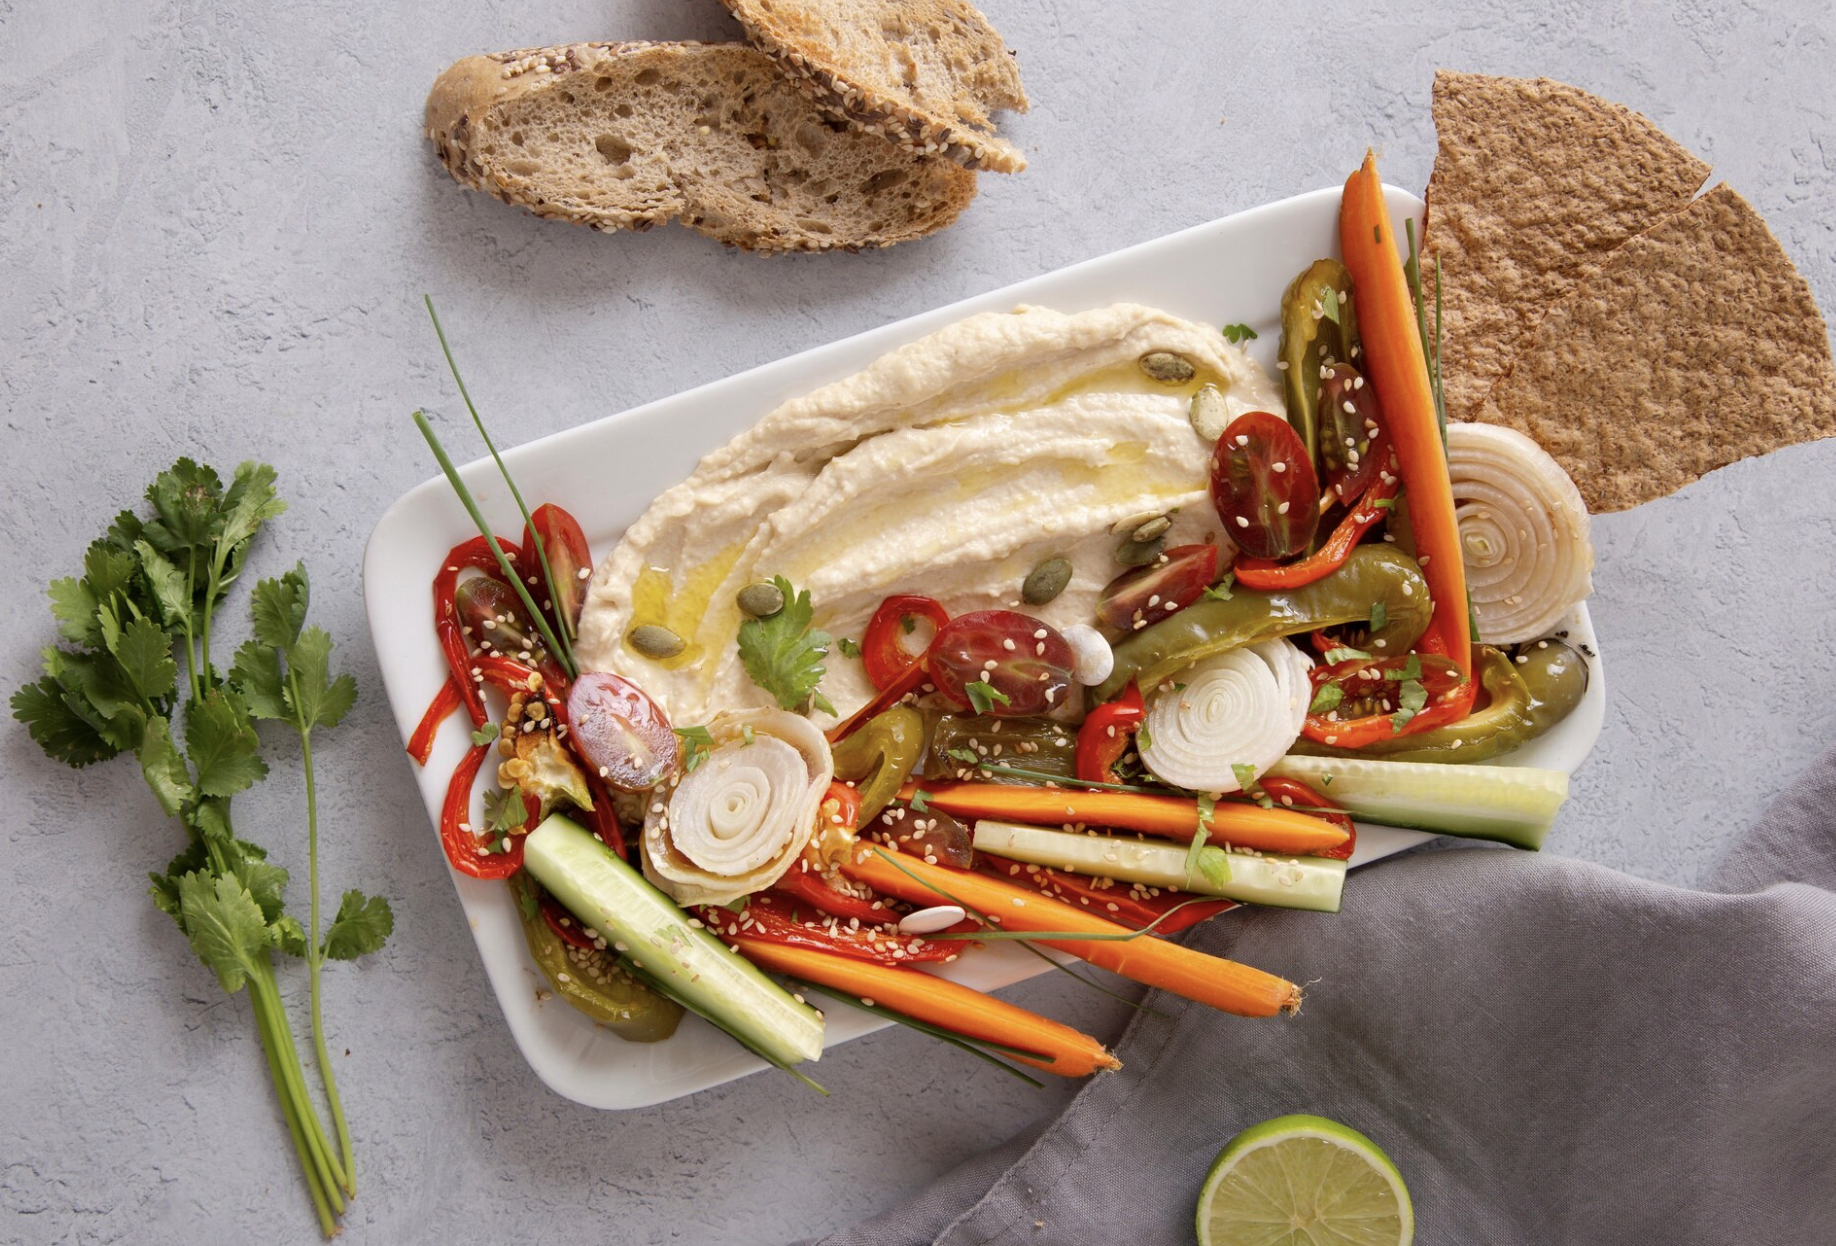 8 Mediterranean Diet Snacks to Boost Health and Fuel Your Rides